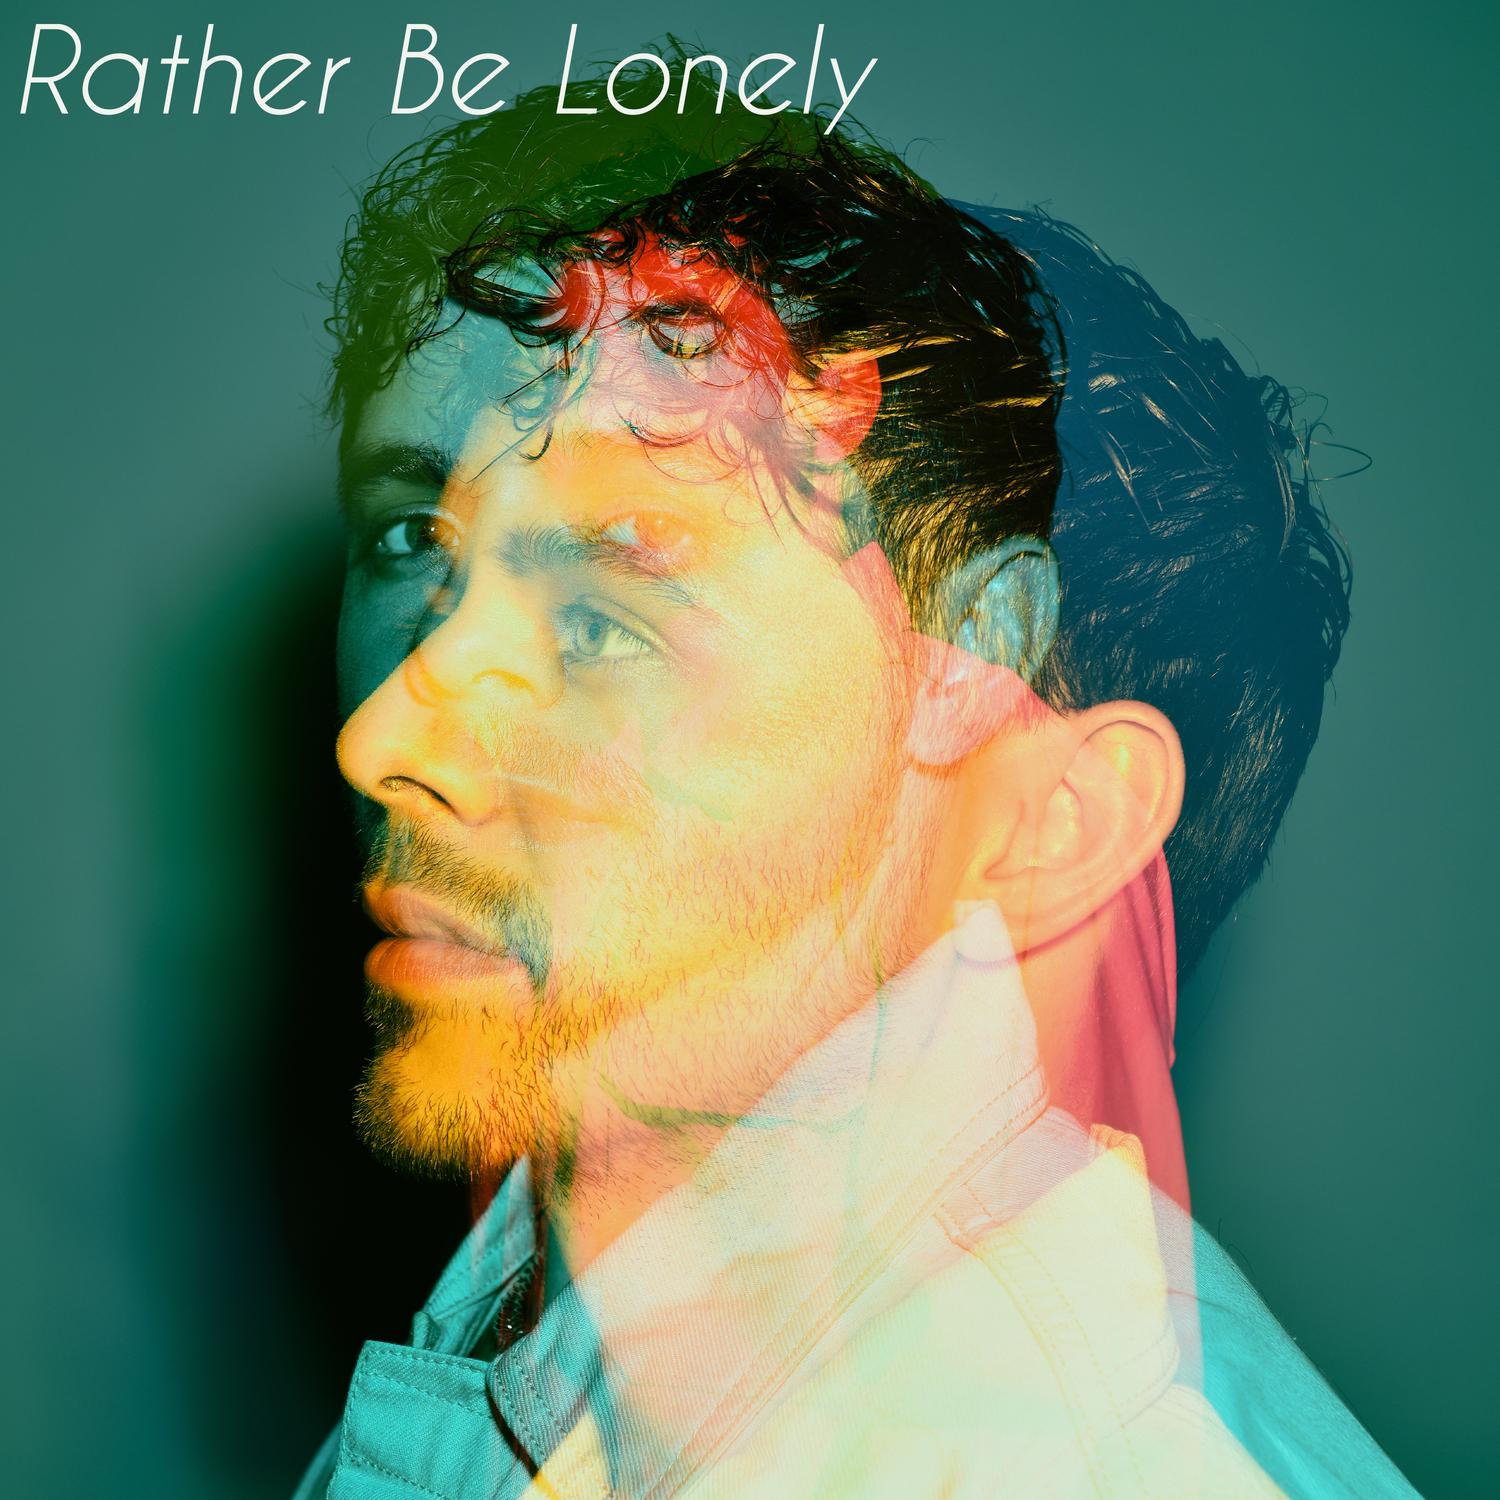 David Archuleta - Rather Be Lonely